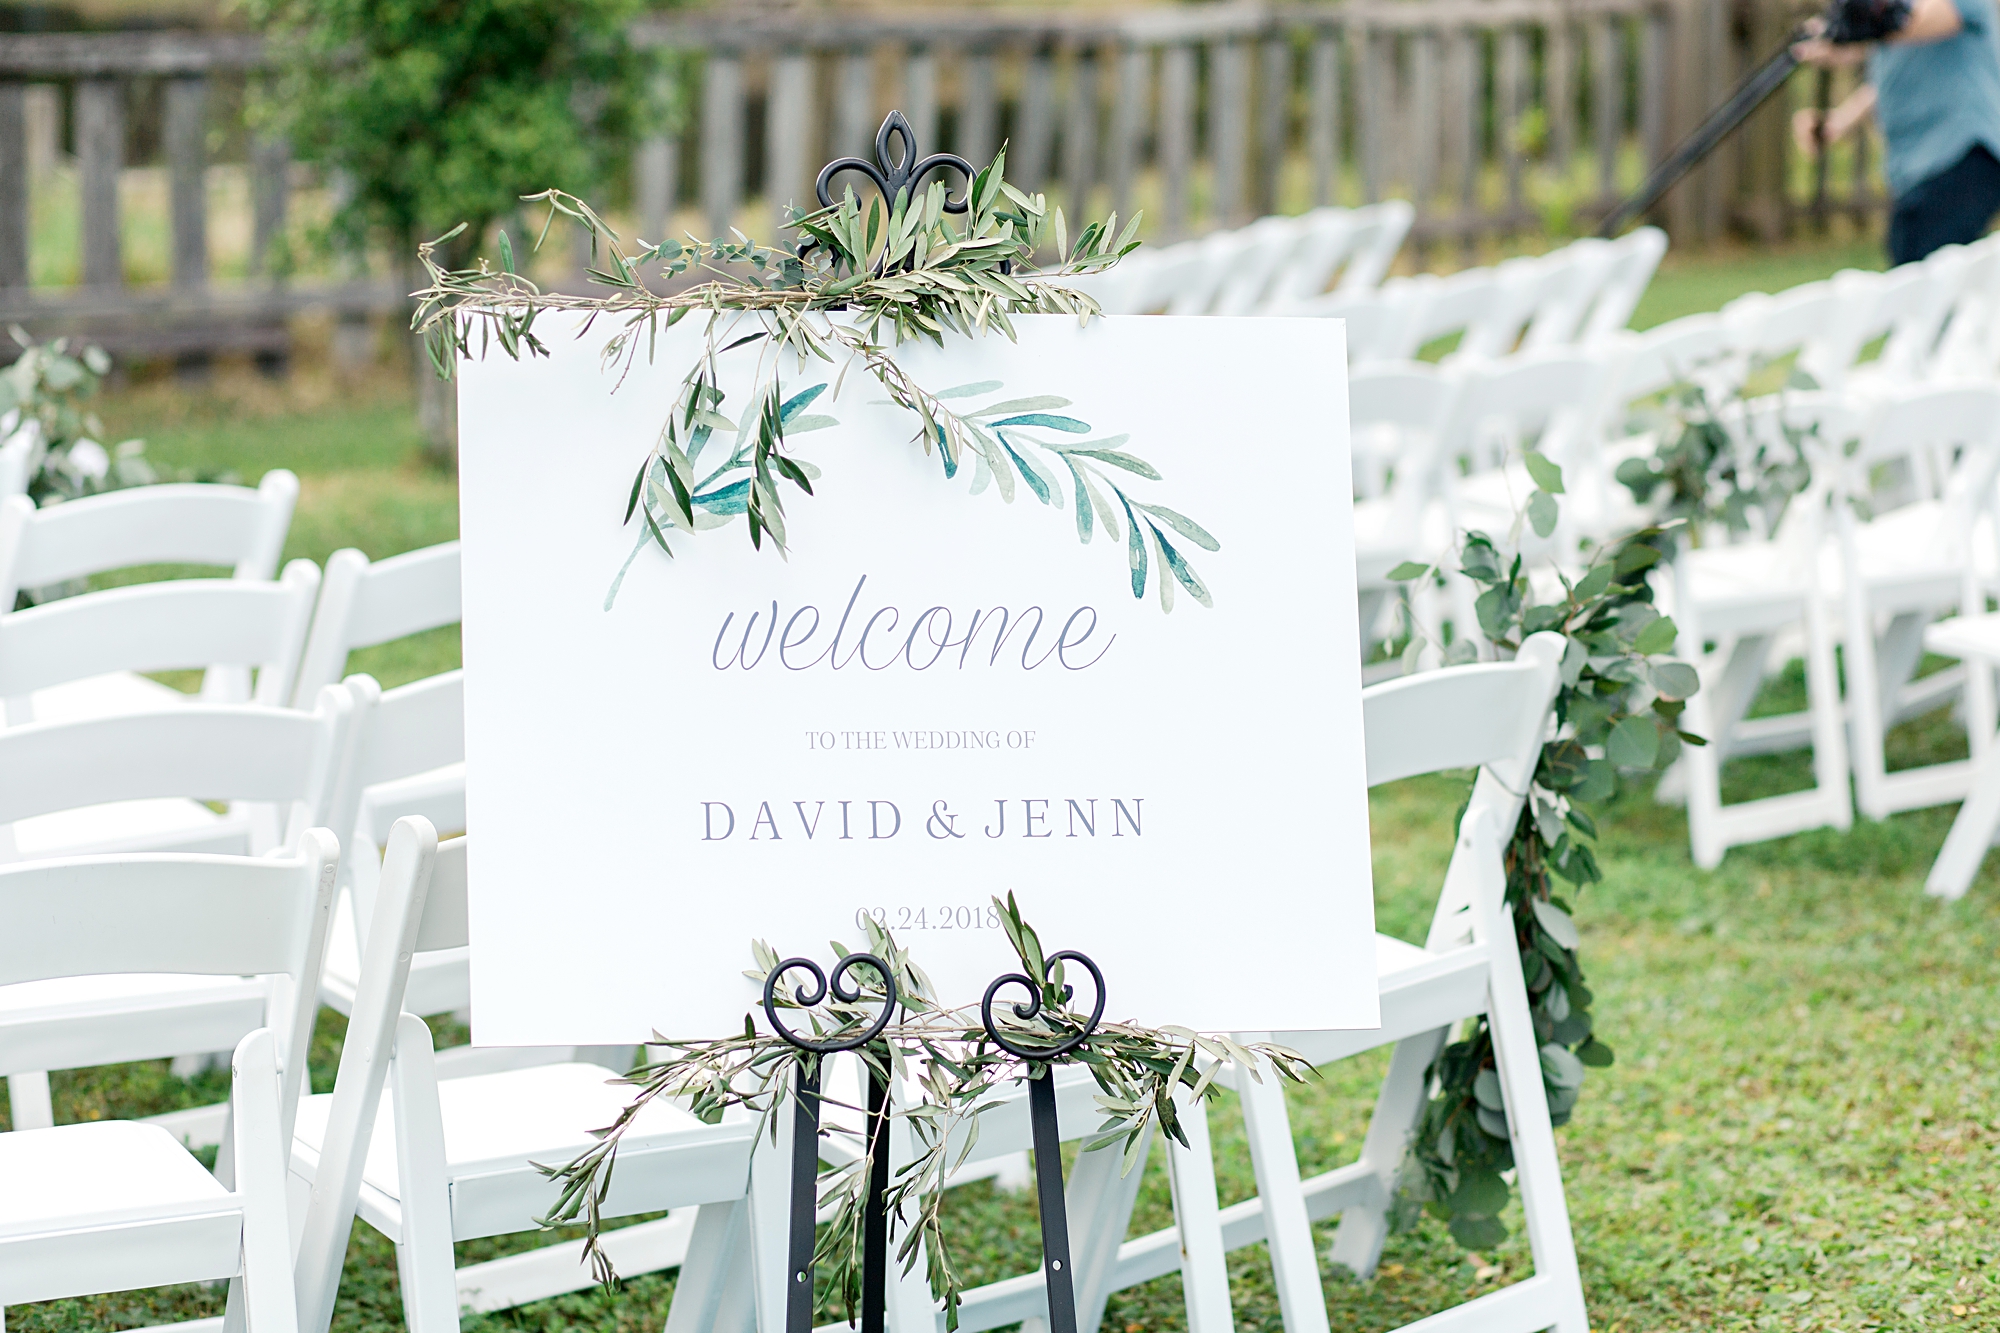 Ceremony welcome sign